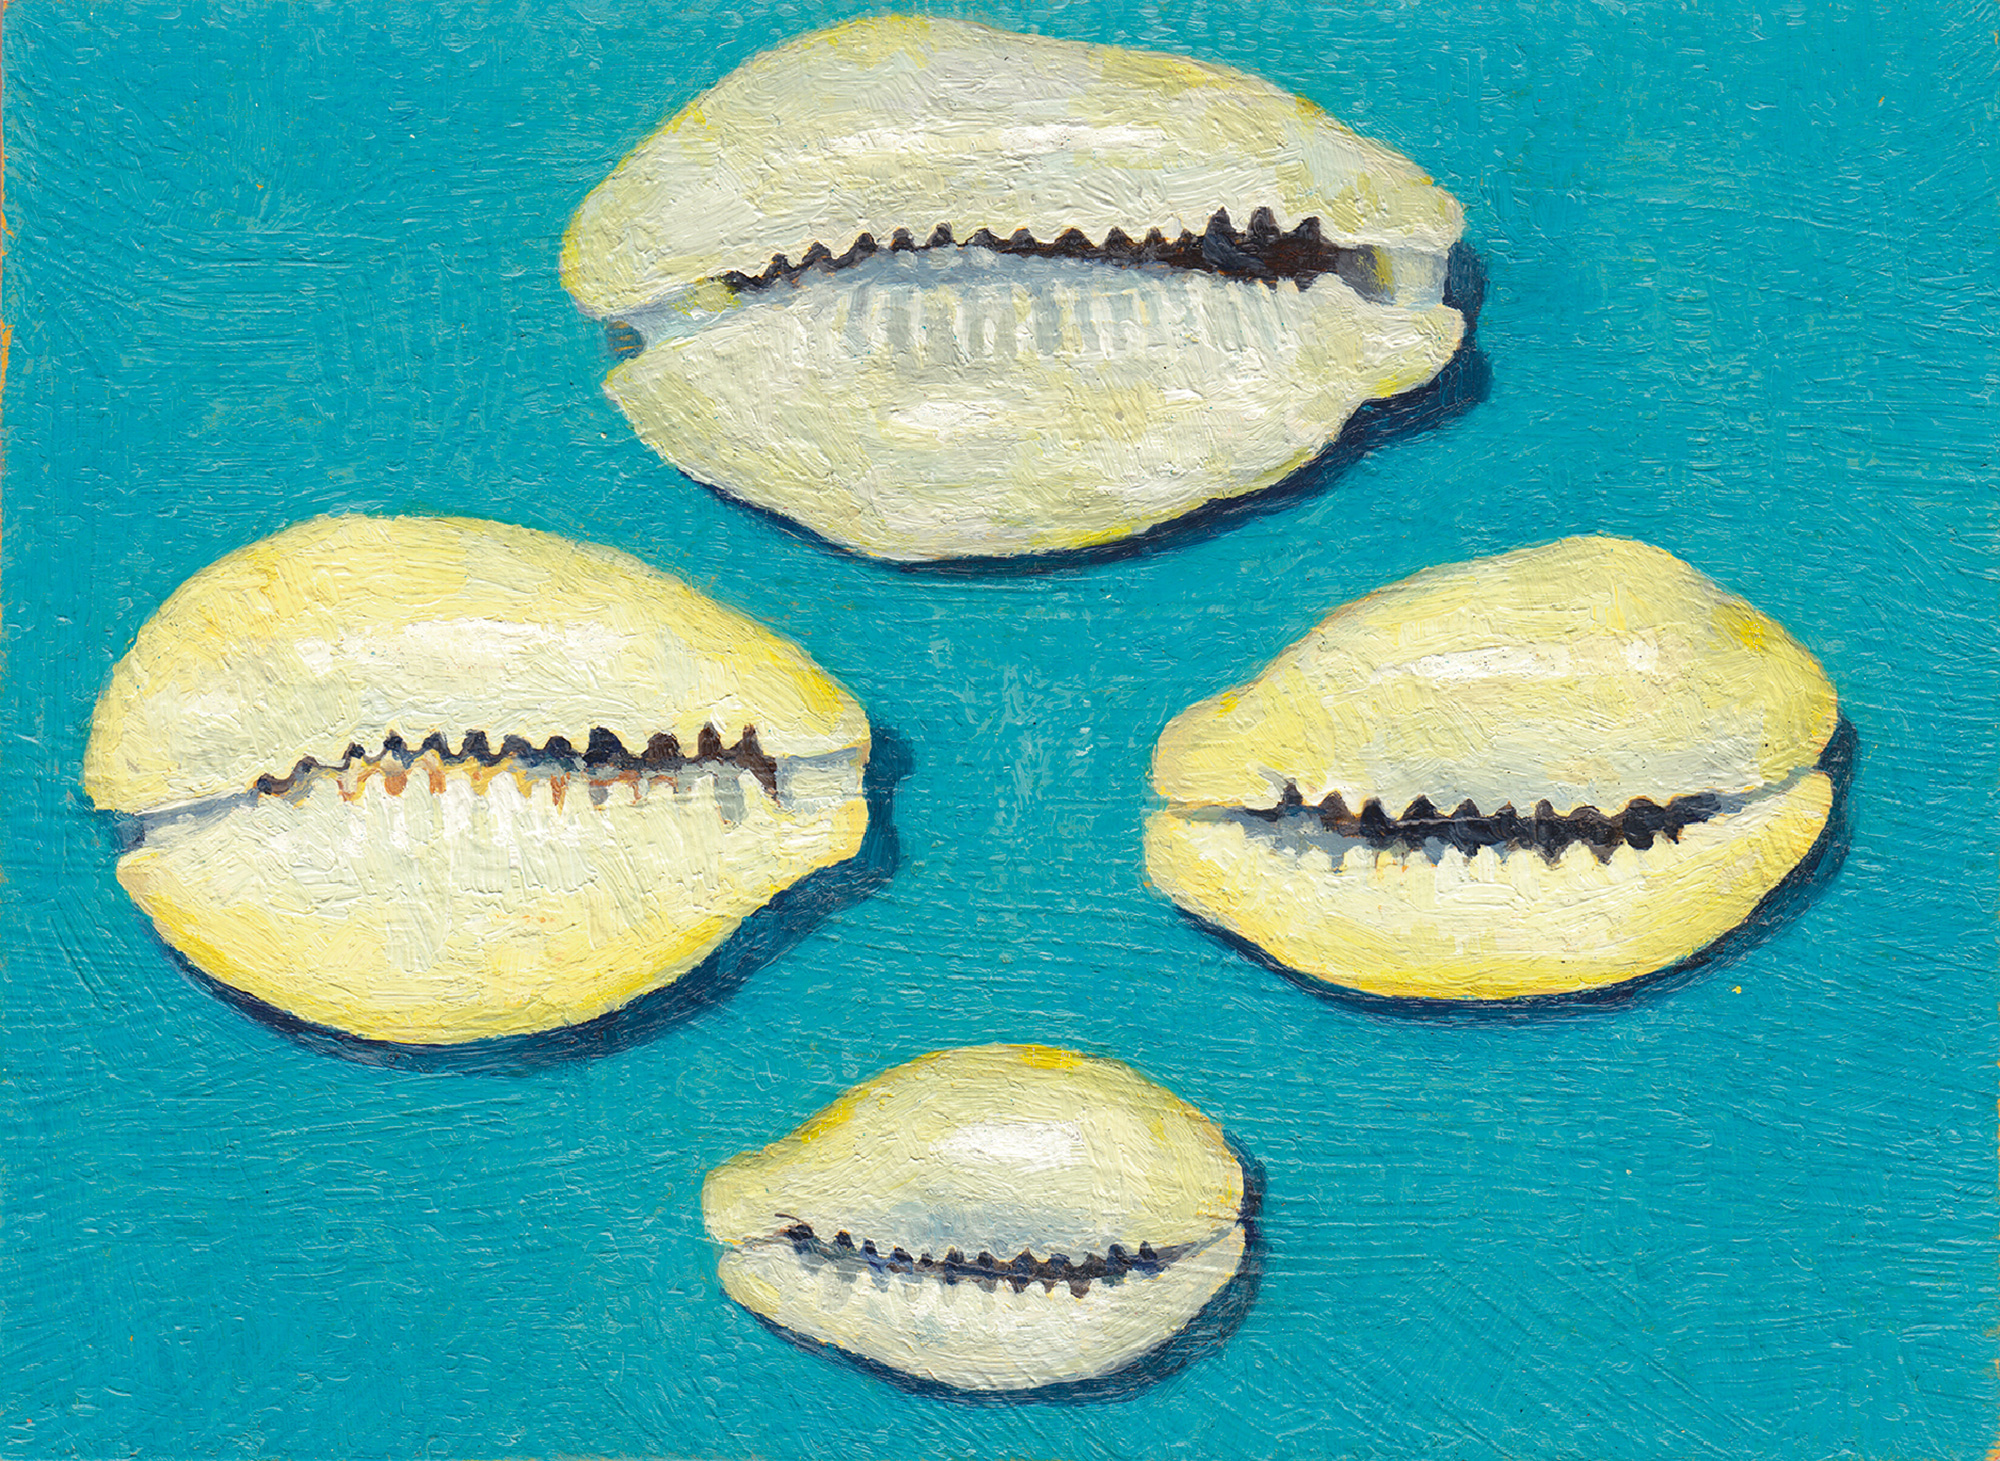 A two thousand and thirteen painting of four cowrie money shells by Conrad Bakker from his project titled “Untitled Project: eBay, Cypraea moneta.” 